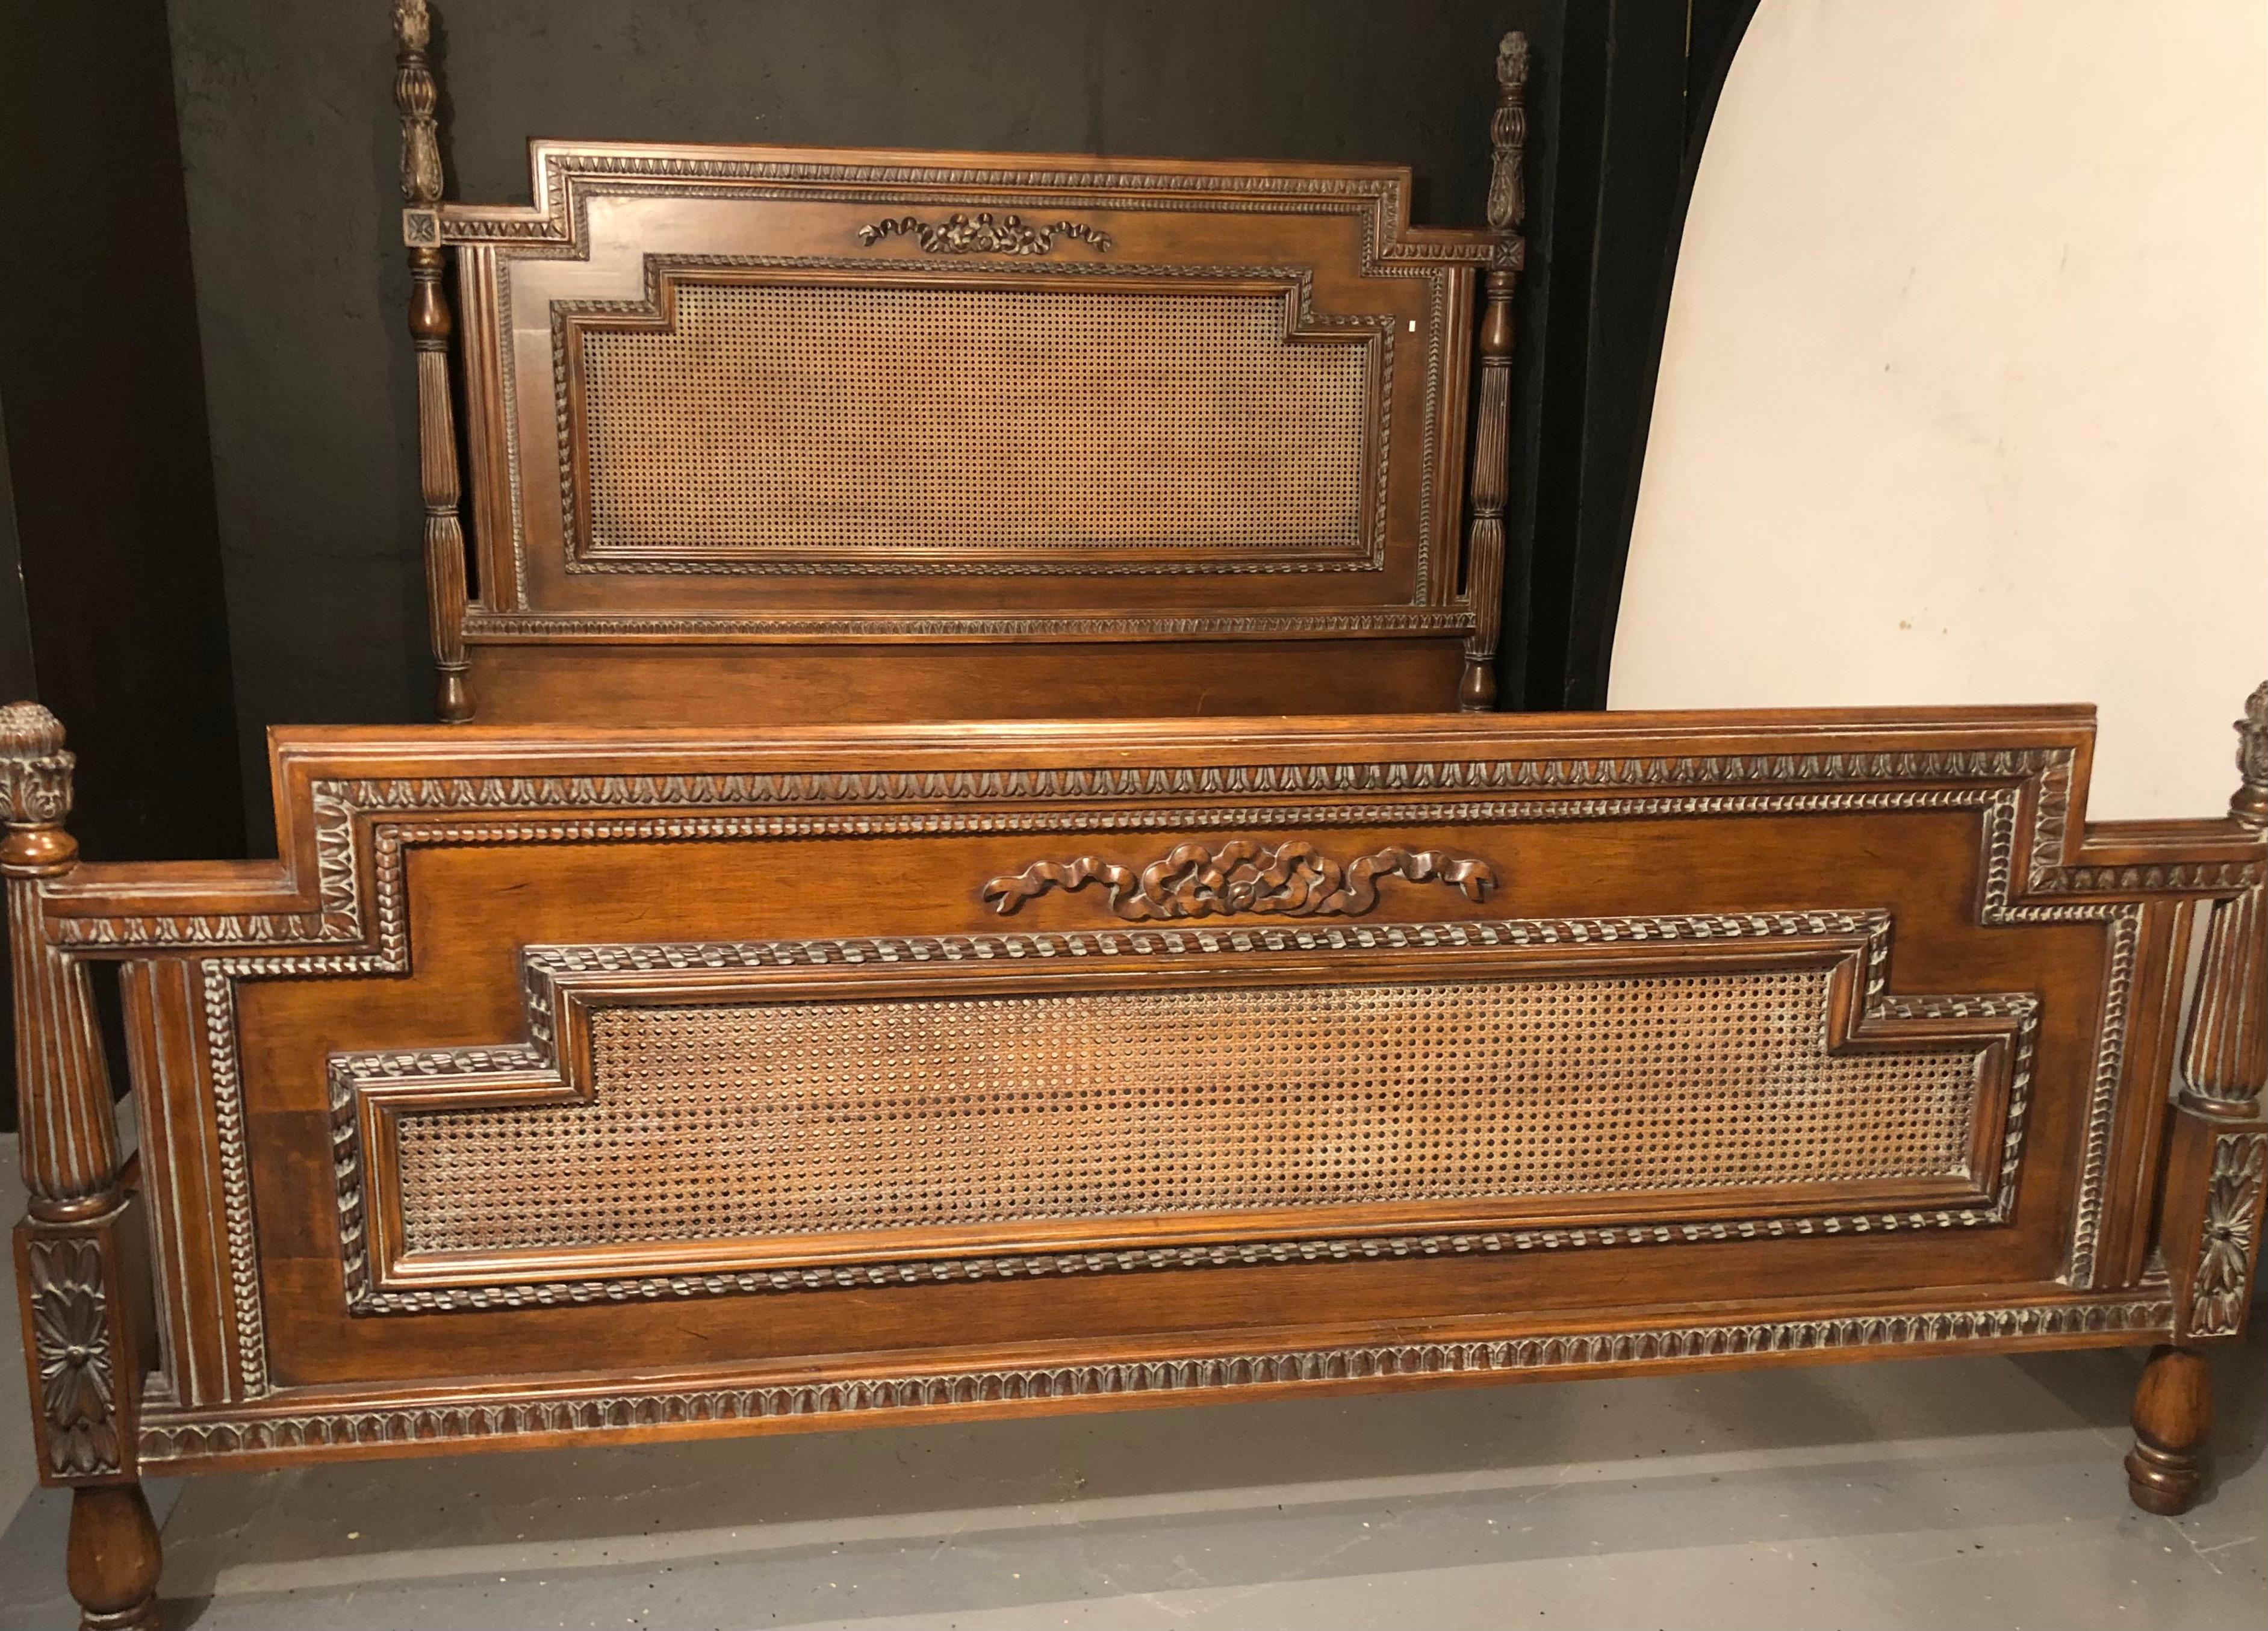 Louis XVI Antique Walnut Carved King Sized Bed, Headboard, Foot-Board and Side-Rails